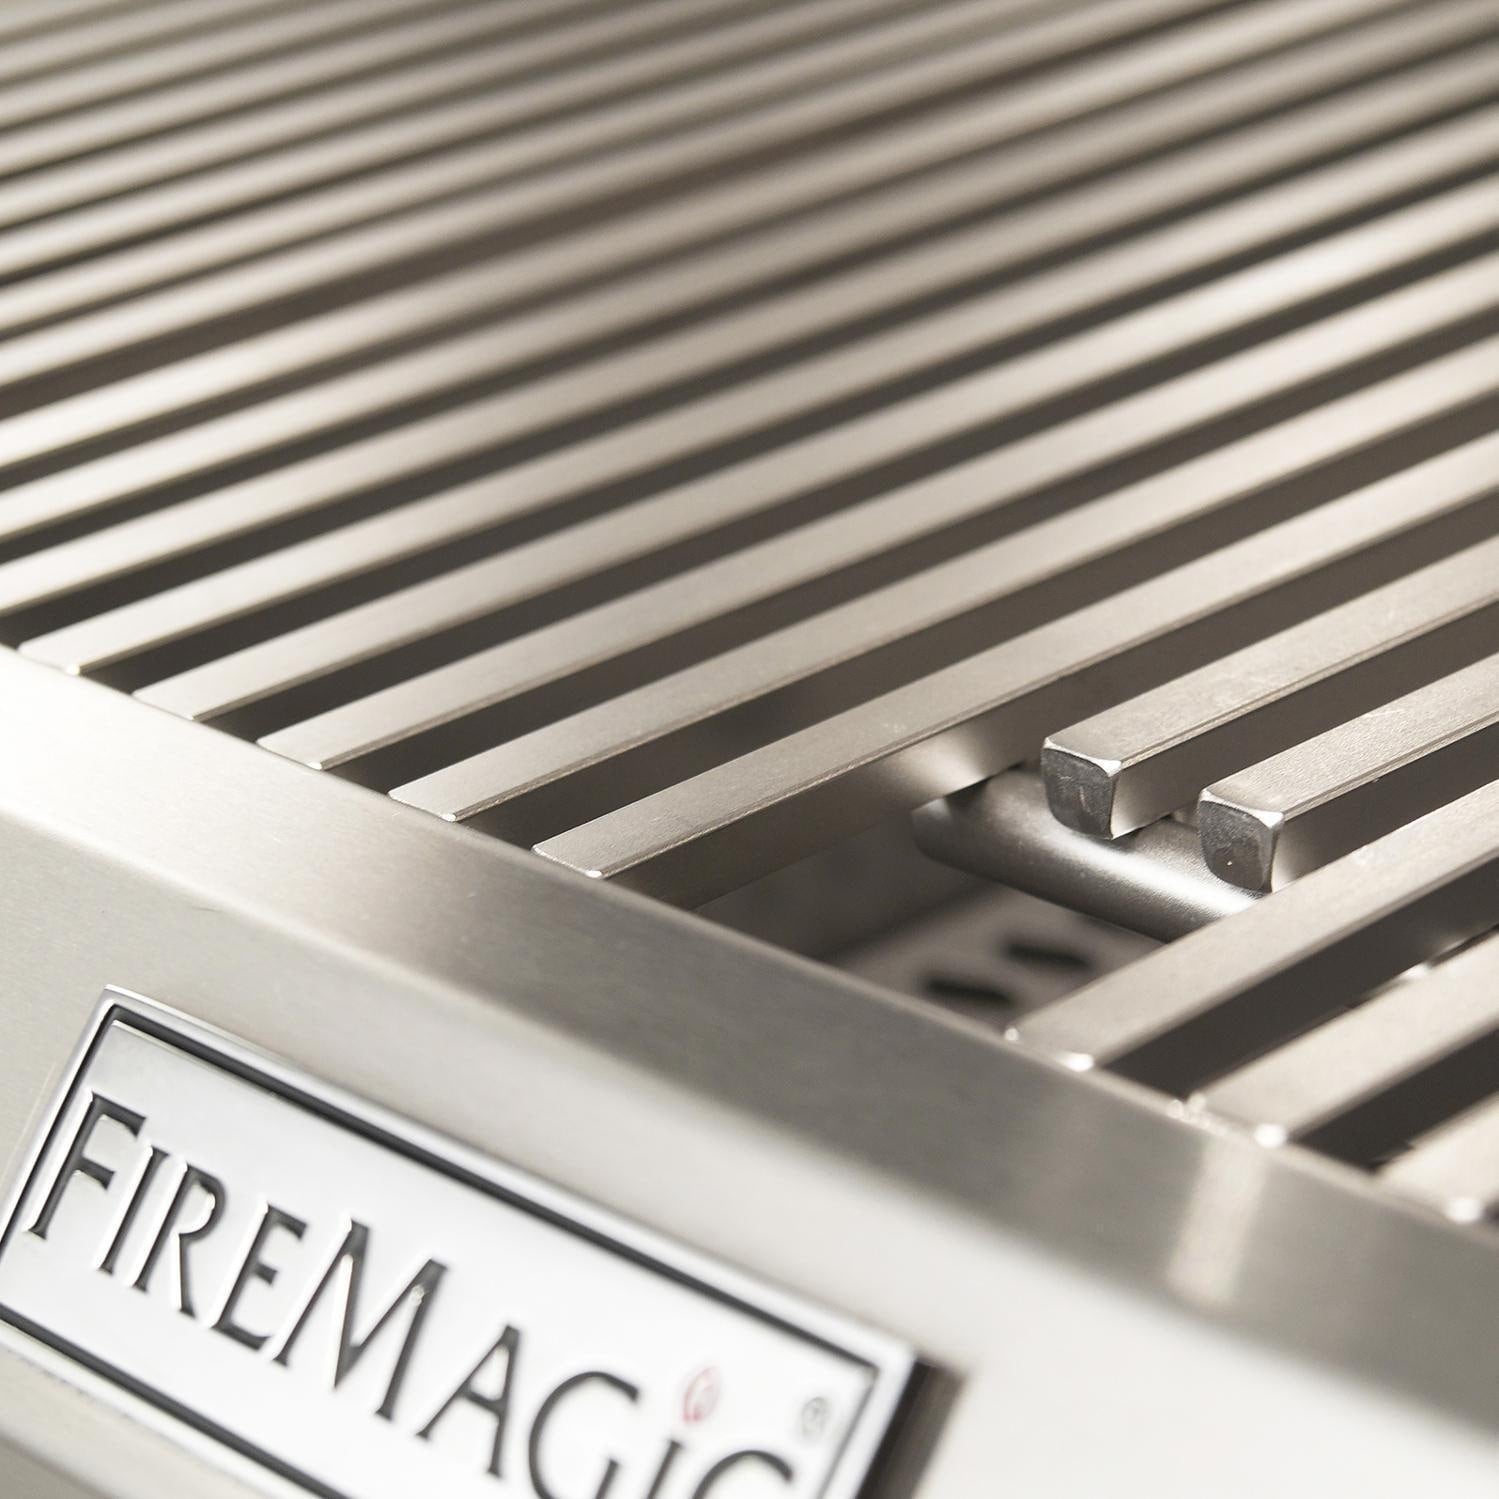 Fire Magic - 24-Inch Grill With Analog Thermometer - Natural Gas / Propane - C430S-RT1X-G6